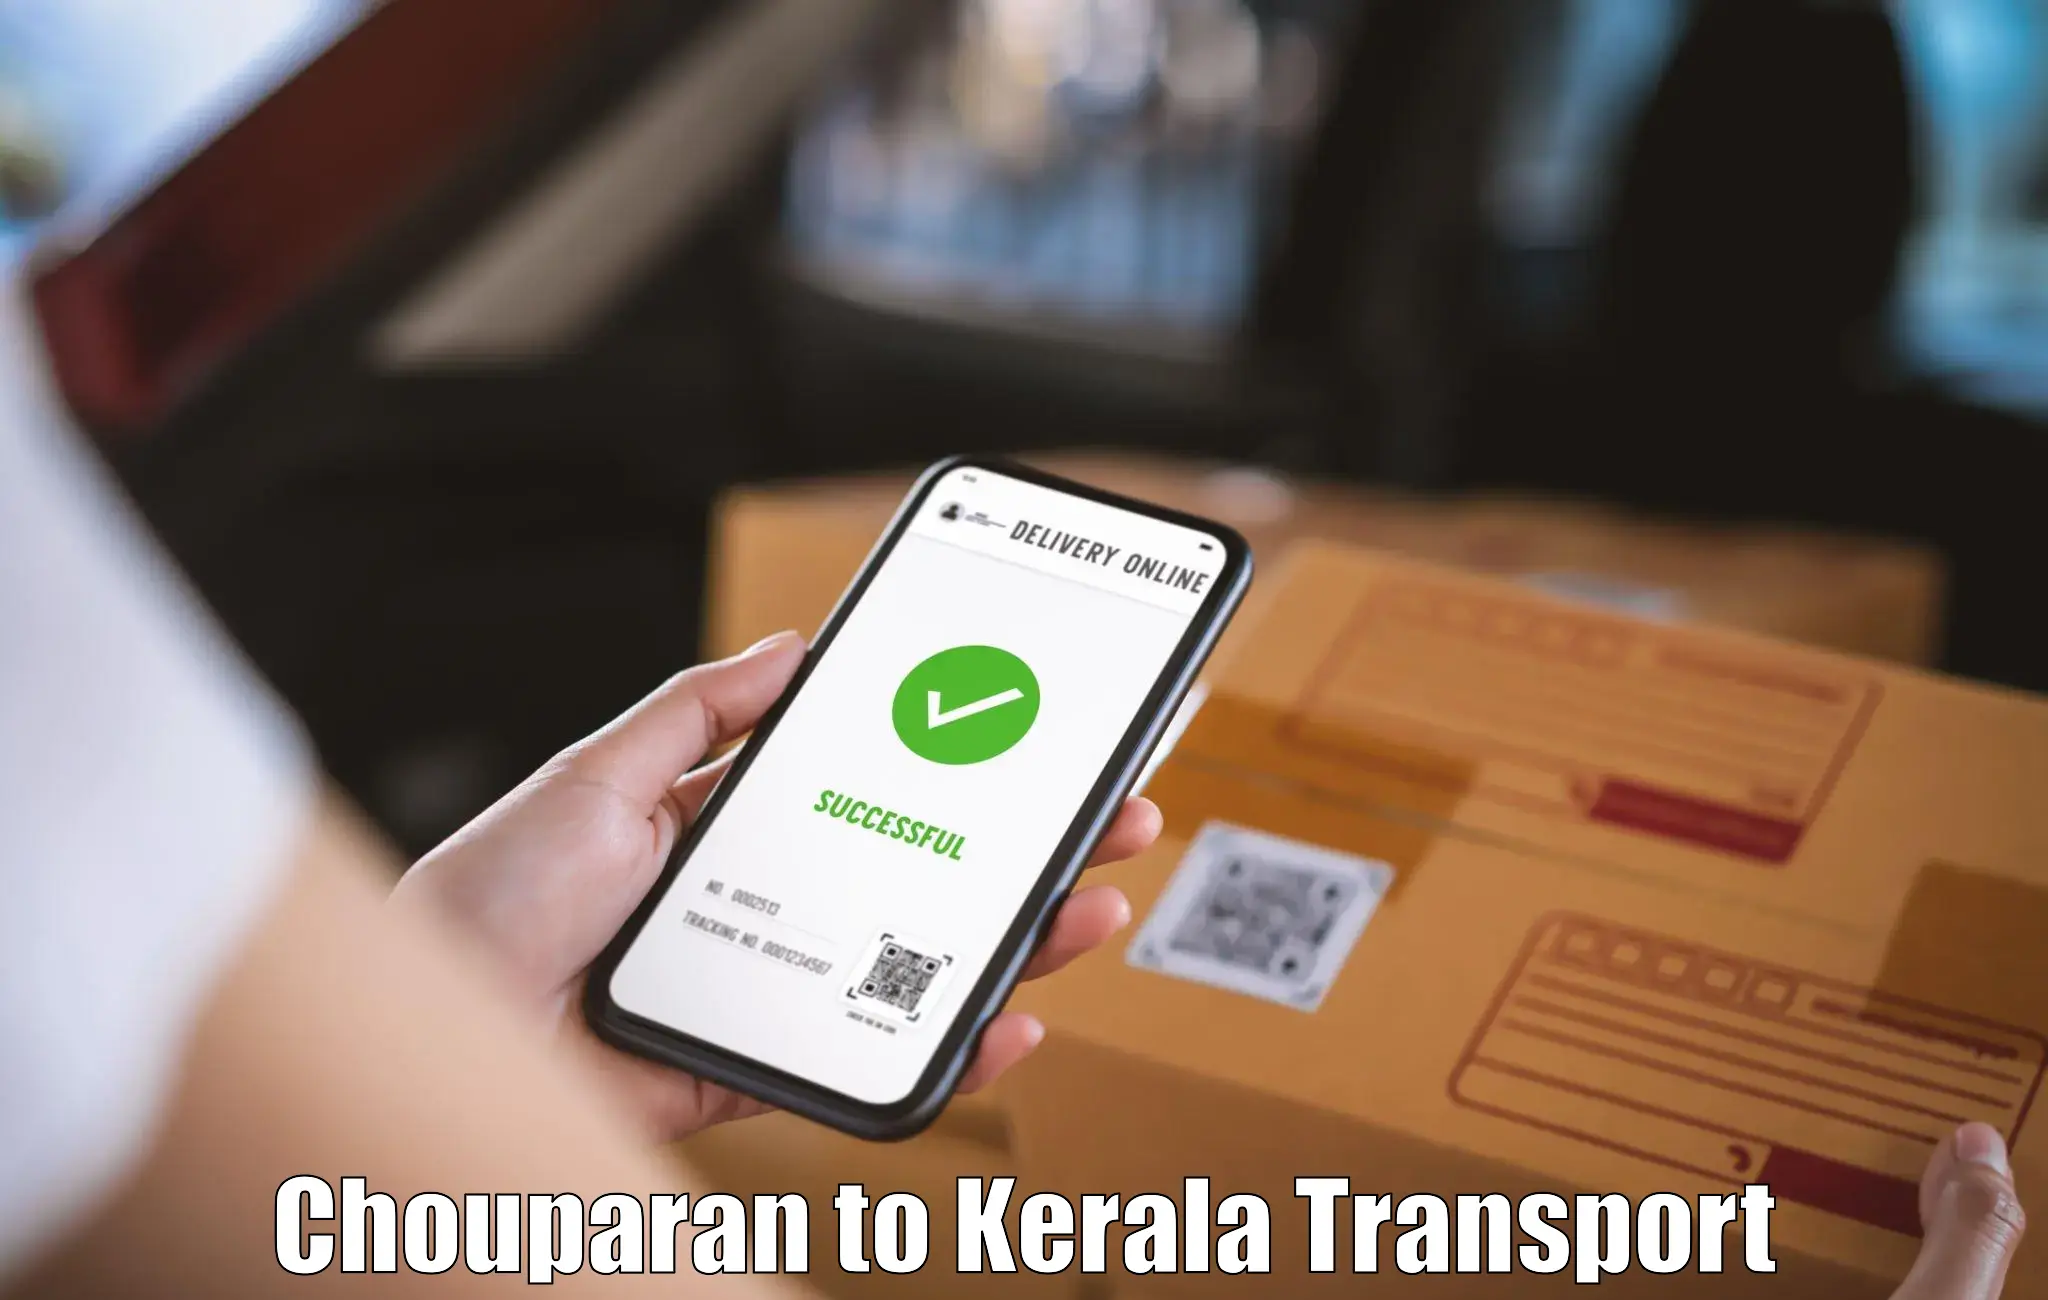 Transport bike from one state to another Chouparan to Kayamkulam